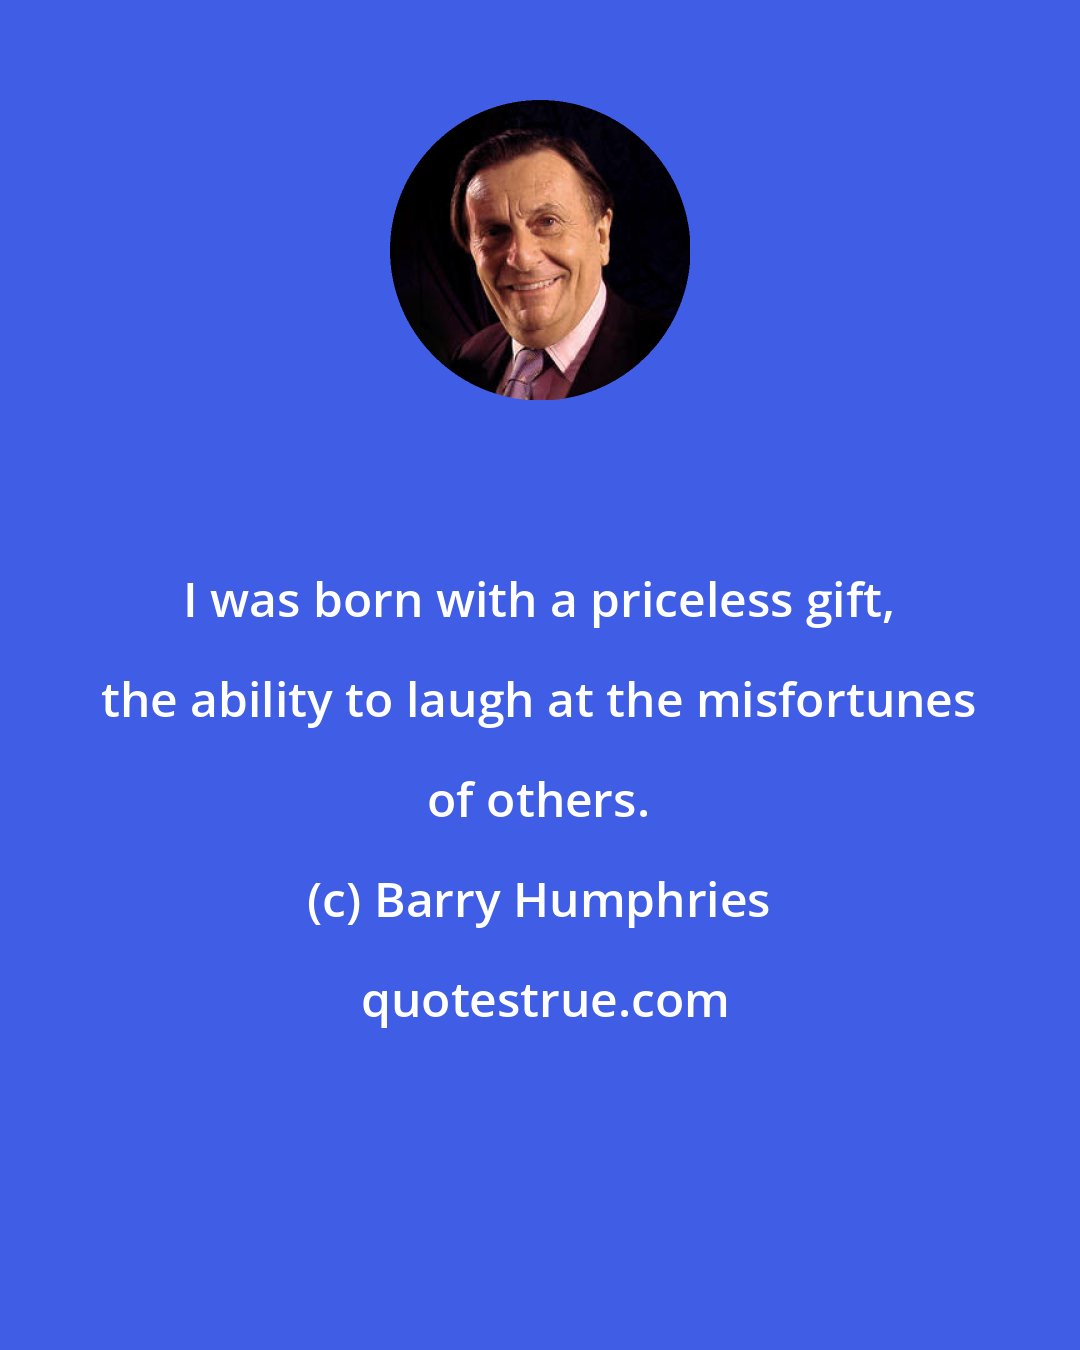 Barry Humphries: I was born with a priceless gift, the ability to laugh at the misfortunes of others.